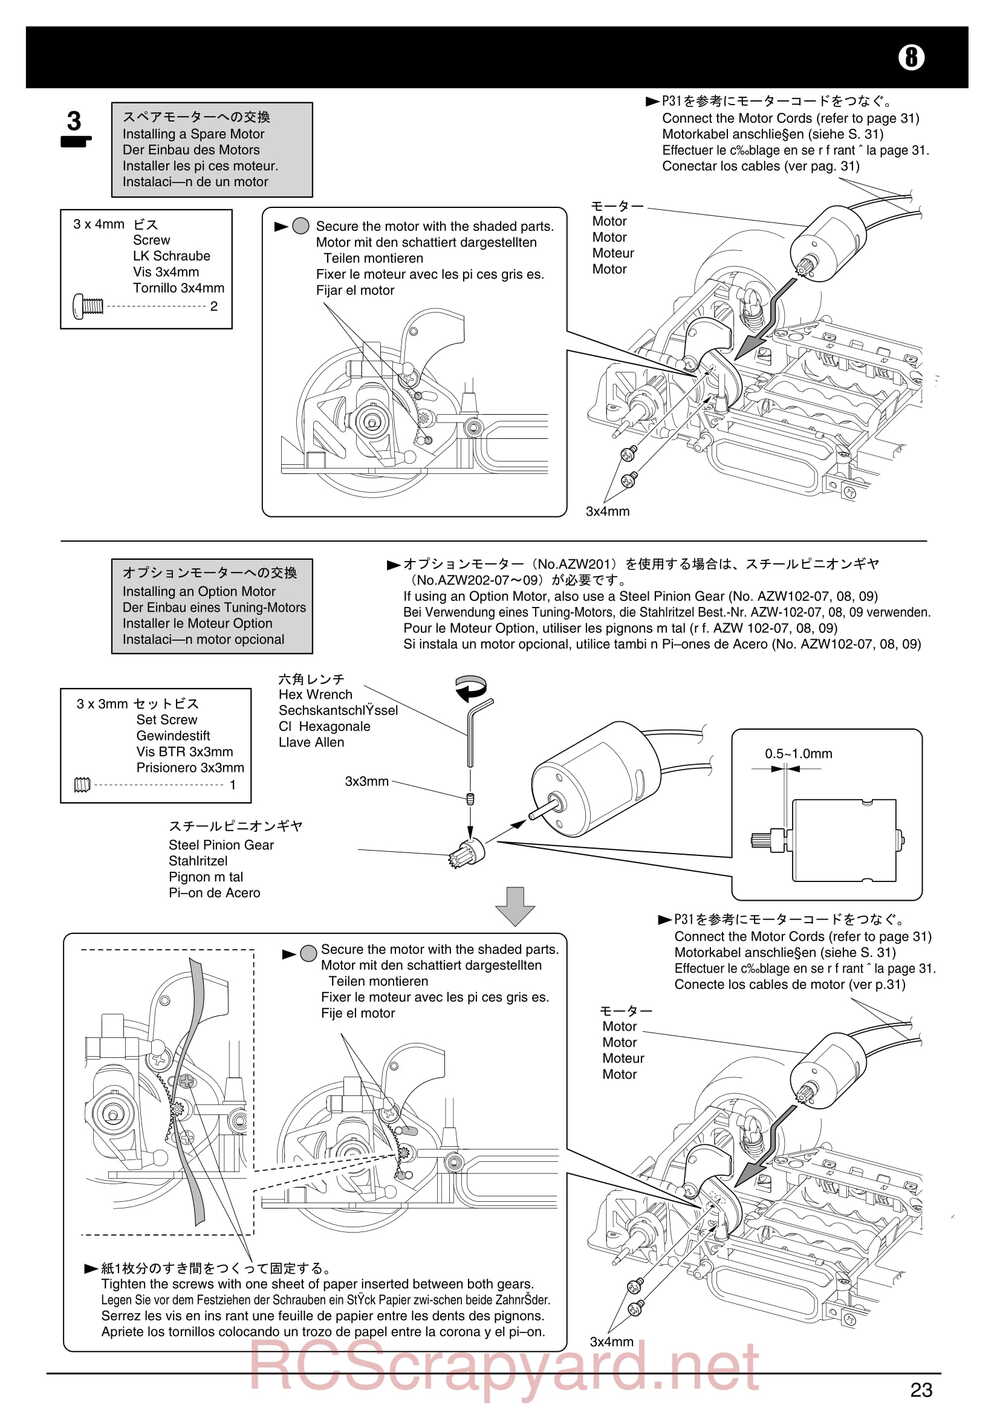 Kyosho - 30551 - a12 Sport - Manual - Page 23